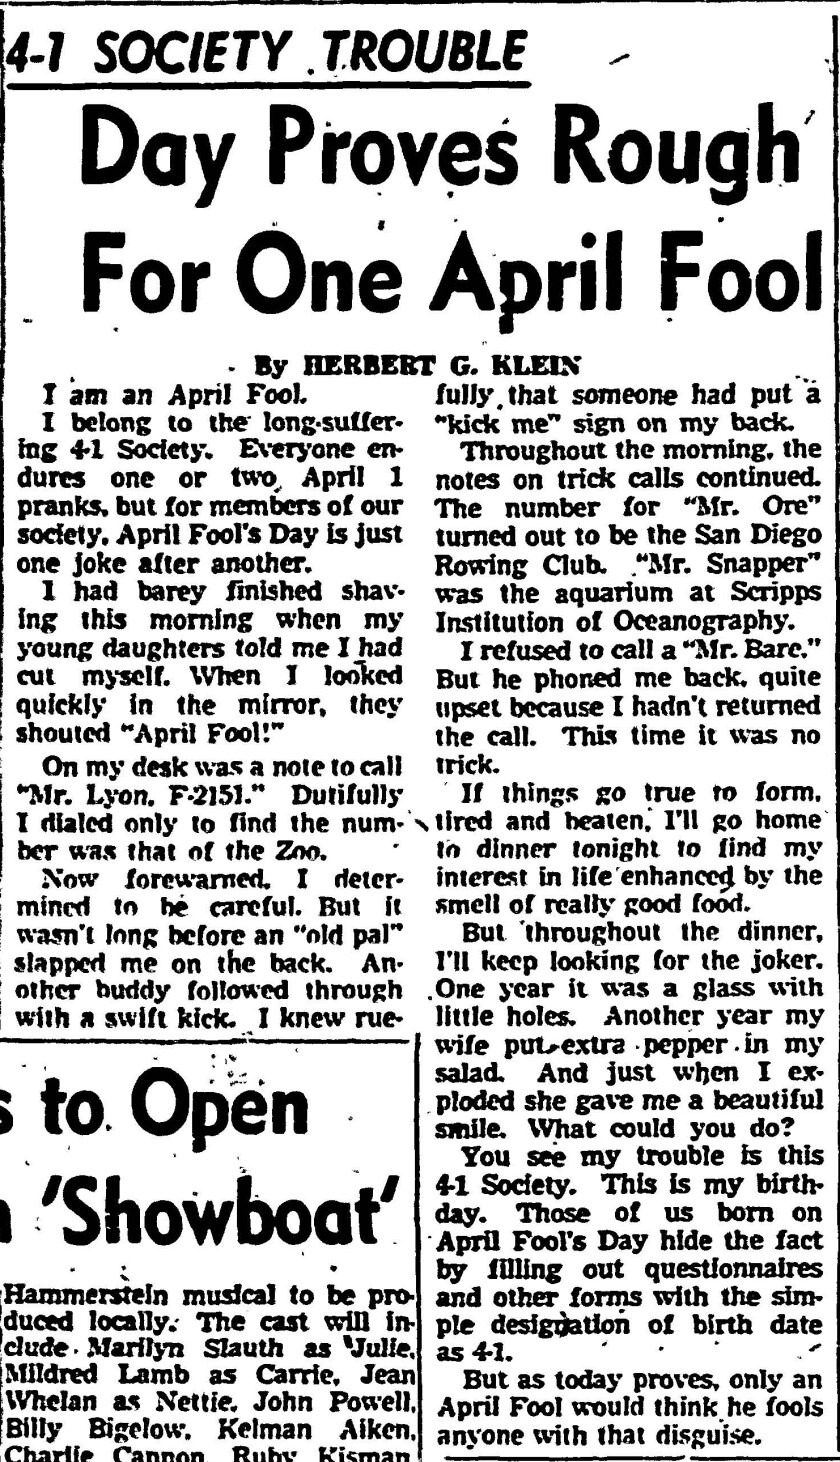 From the Evening Tribune, Tuesday, April 1, 1952: 'Day Proves Rough For One April Fool' by Herbert G. Klein.